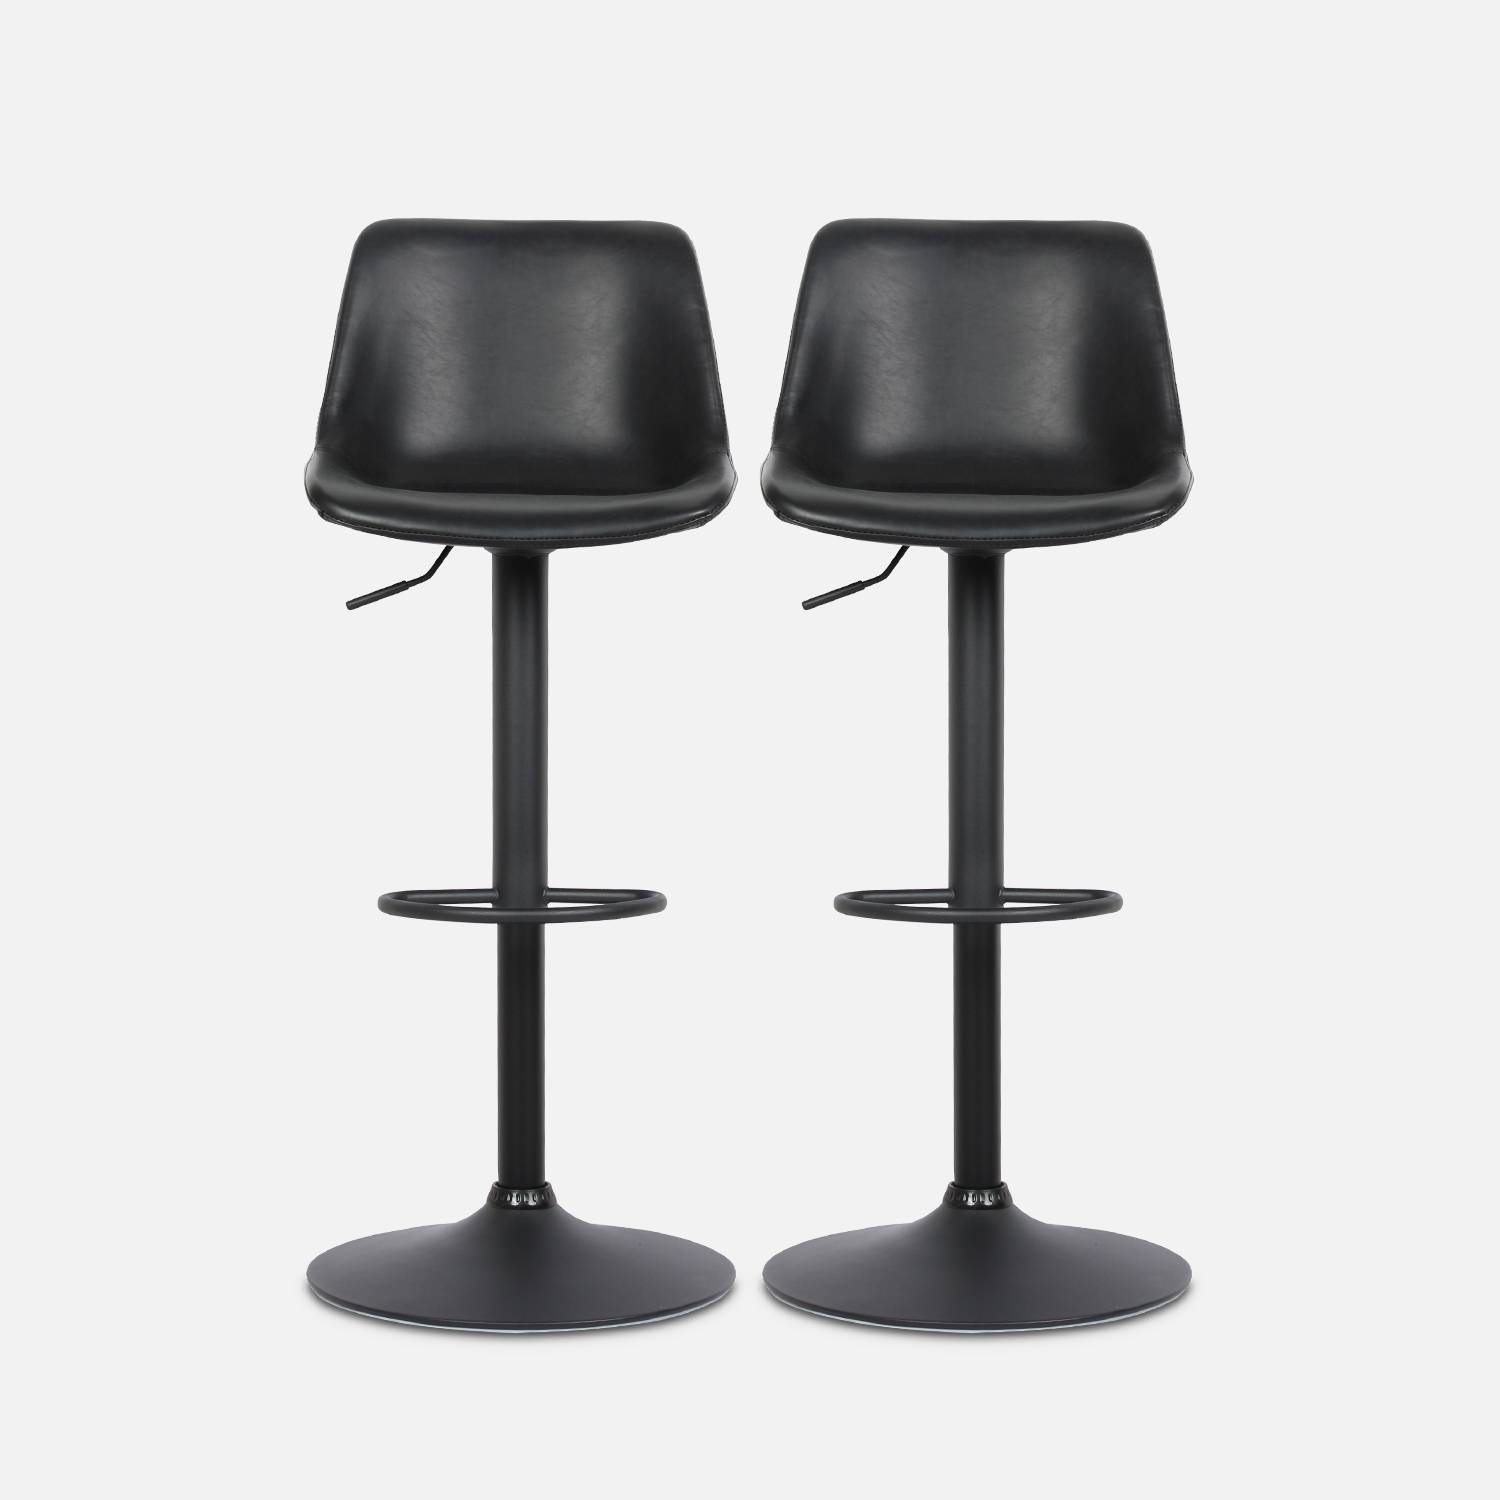 Pair of faux leather, square backrest, adjustable bar stools, seat height 61.5 - 83.5cm - Noah - Black Photo4